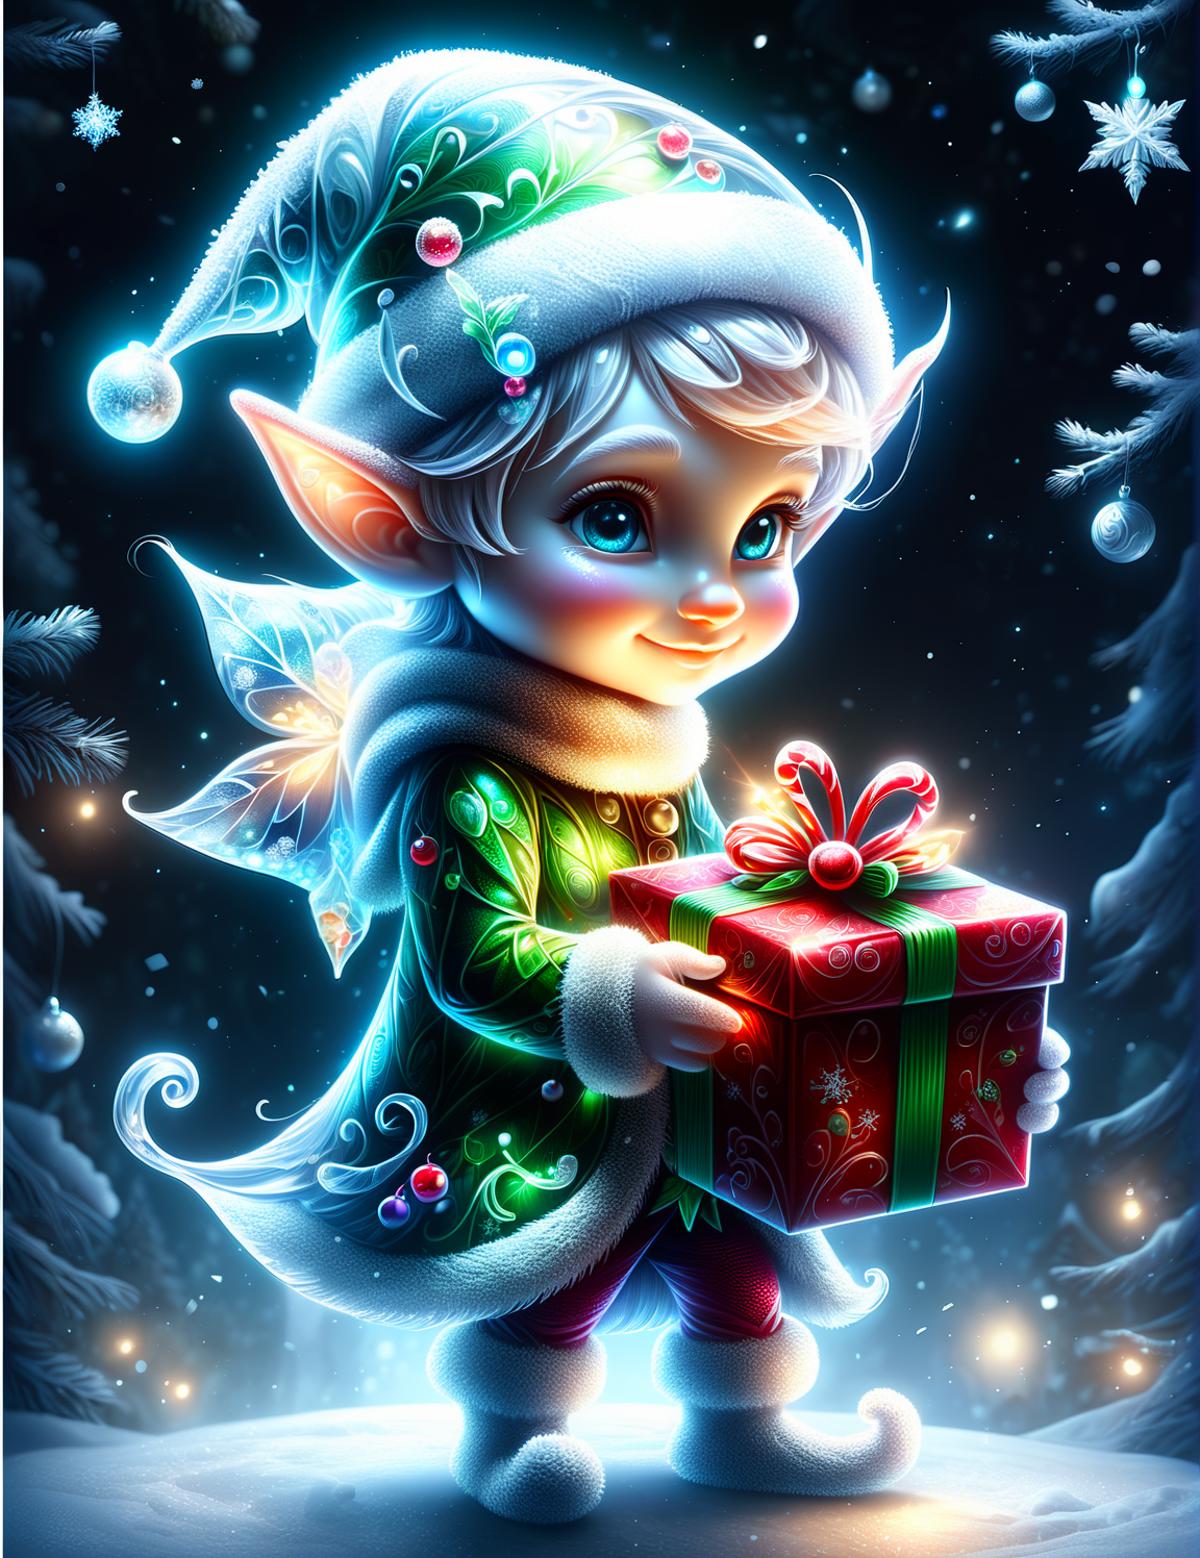 A young, elf-like character holds a gift in a Christmas-themed environment.